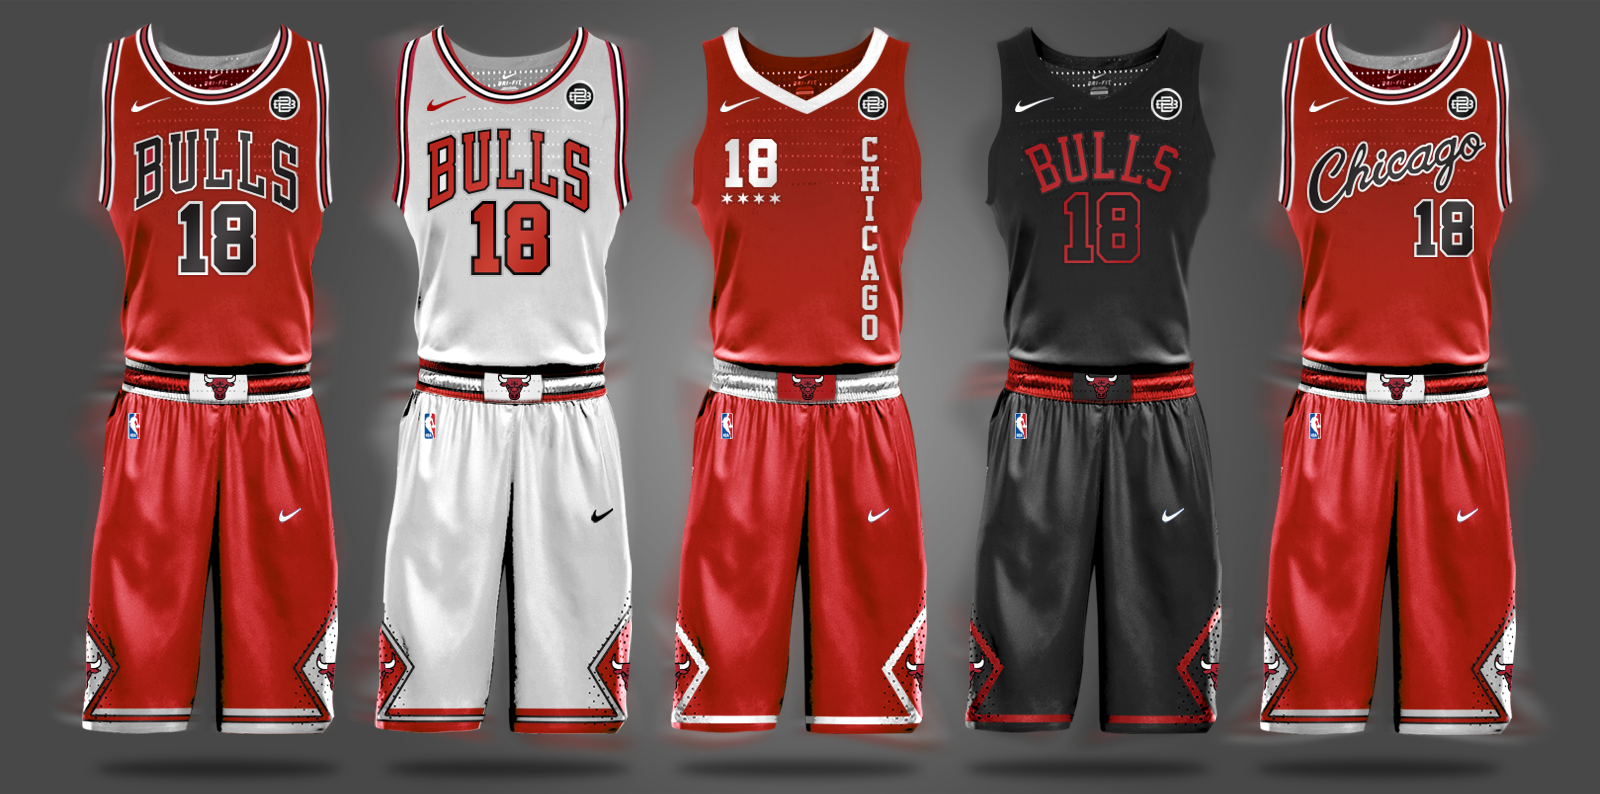 new jersey of nba 2018